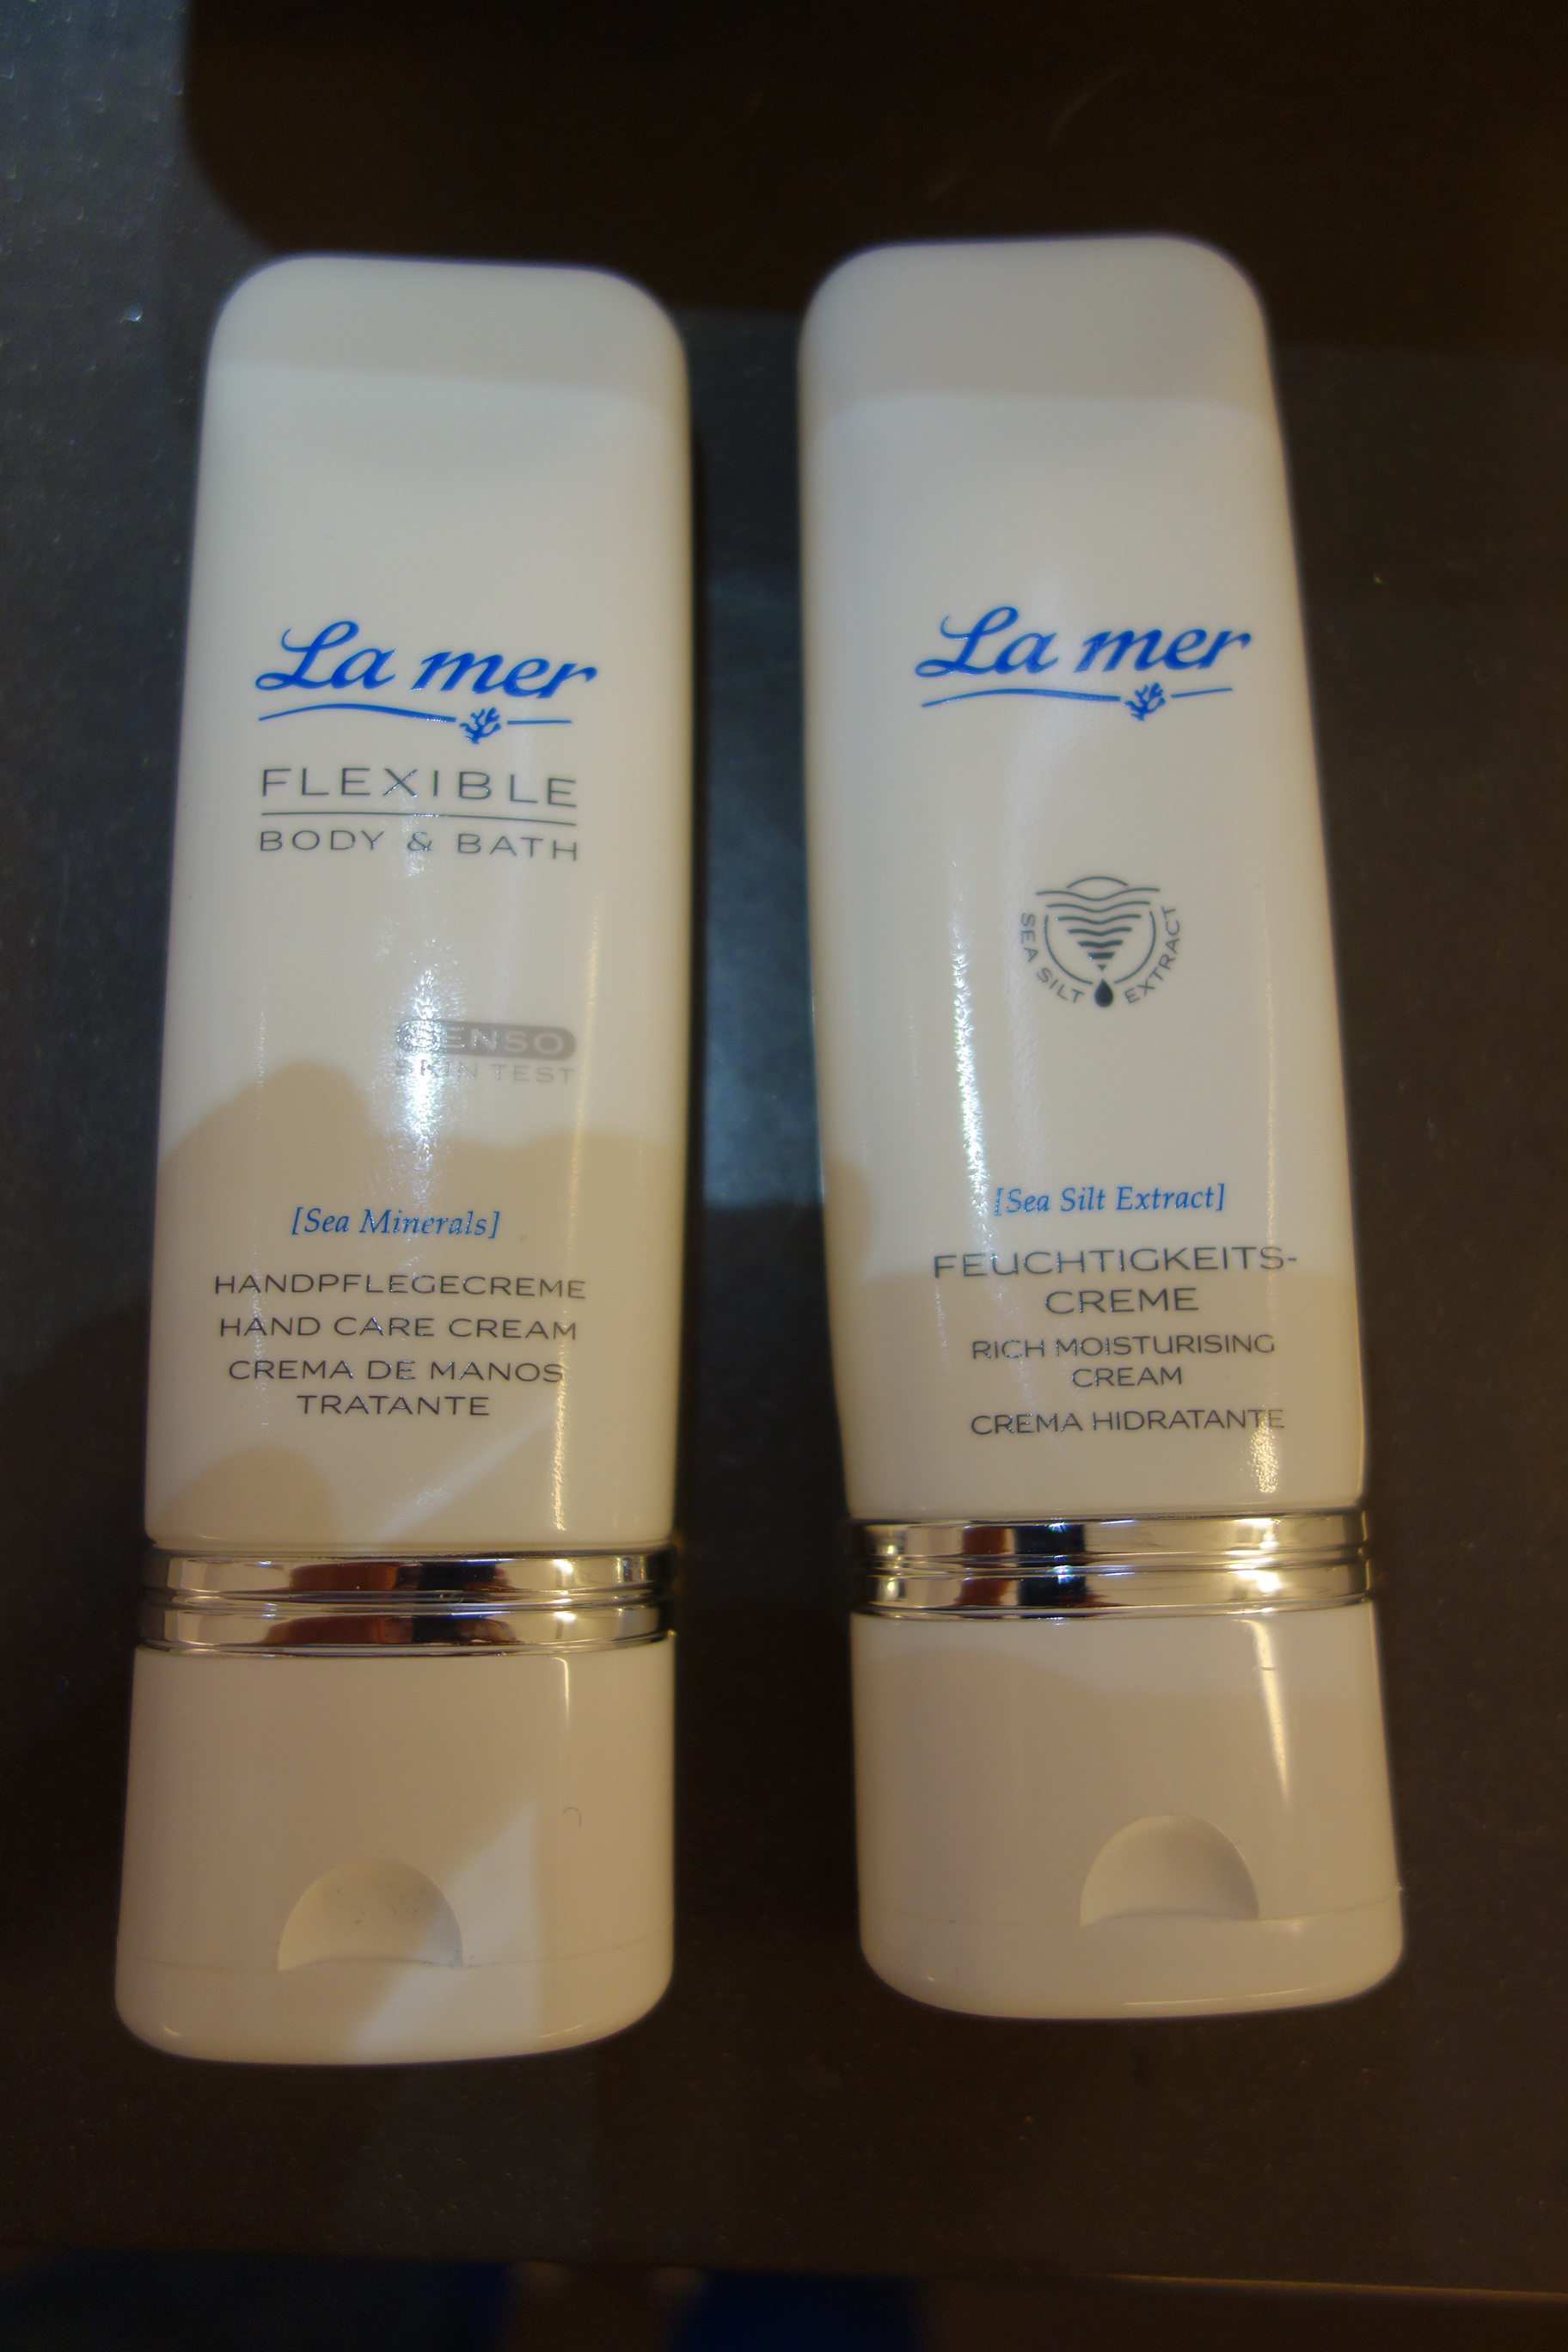 La mer products in the bathroom